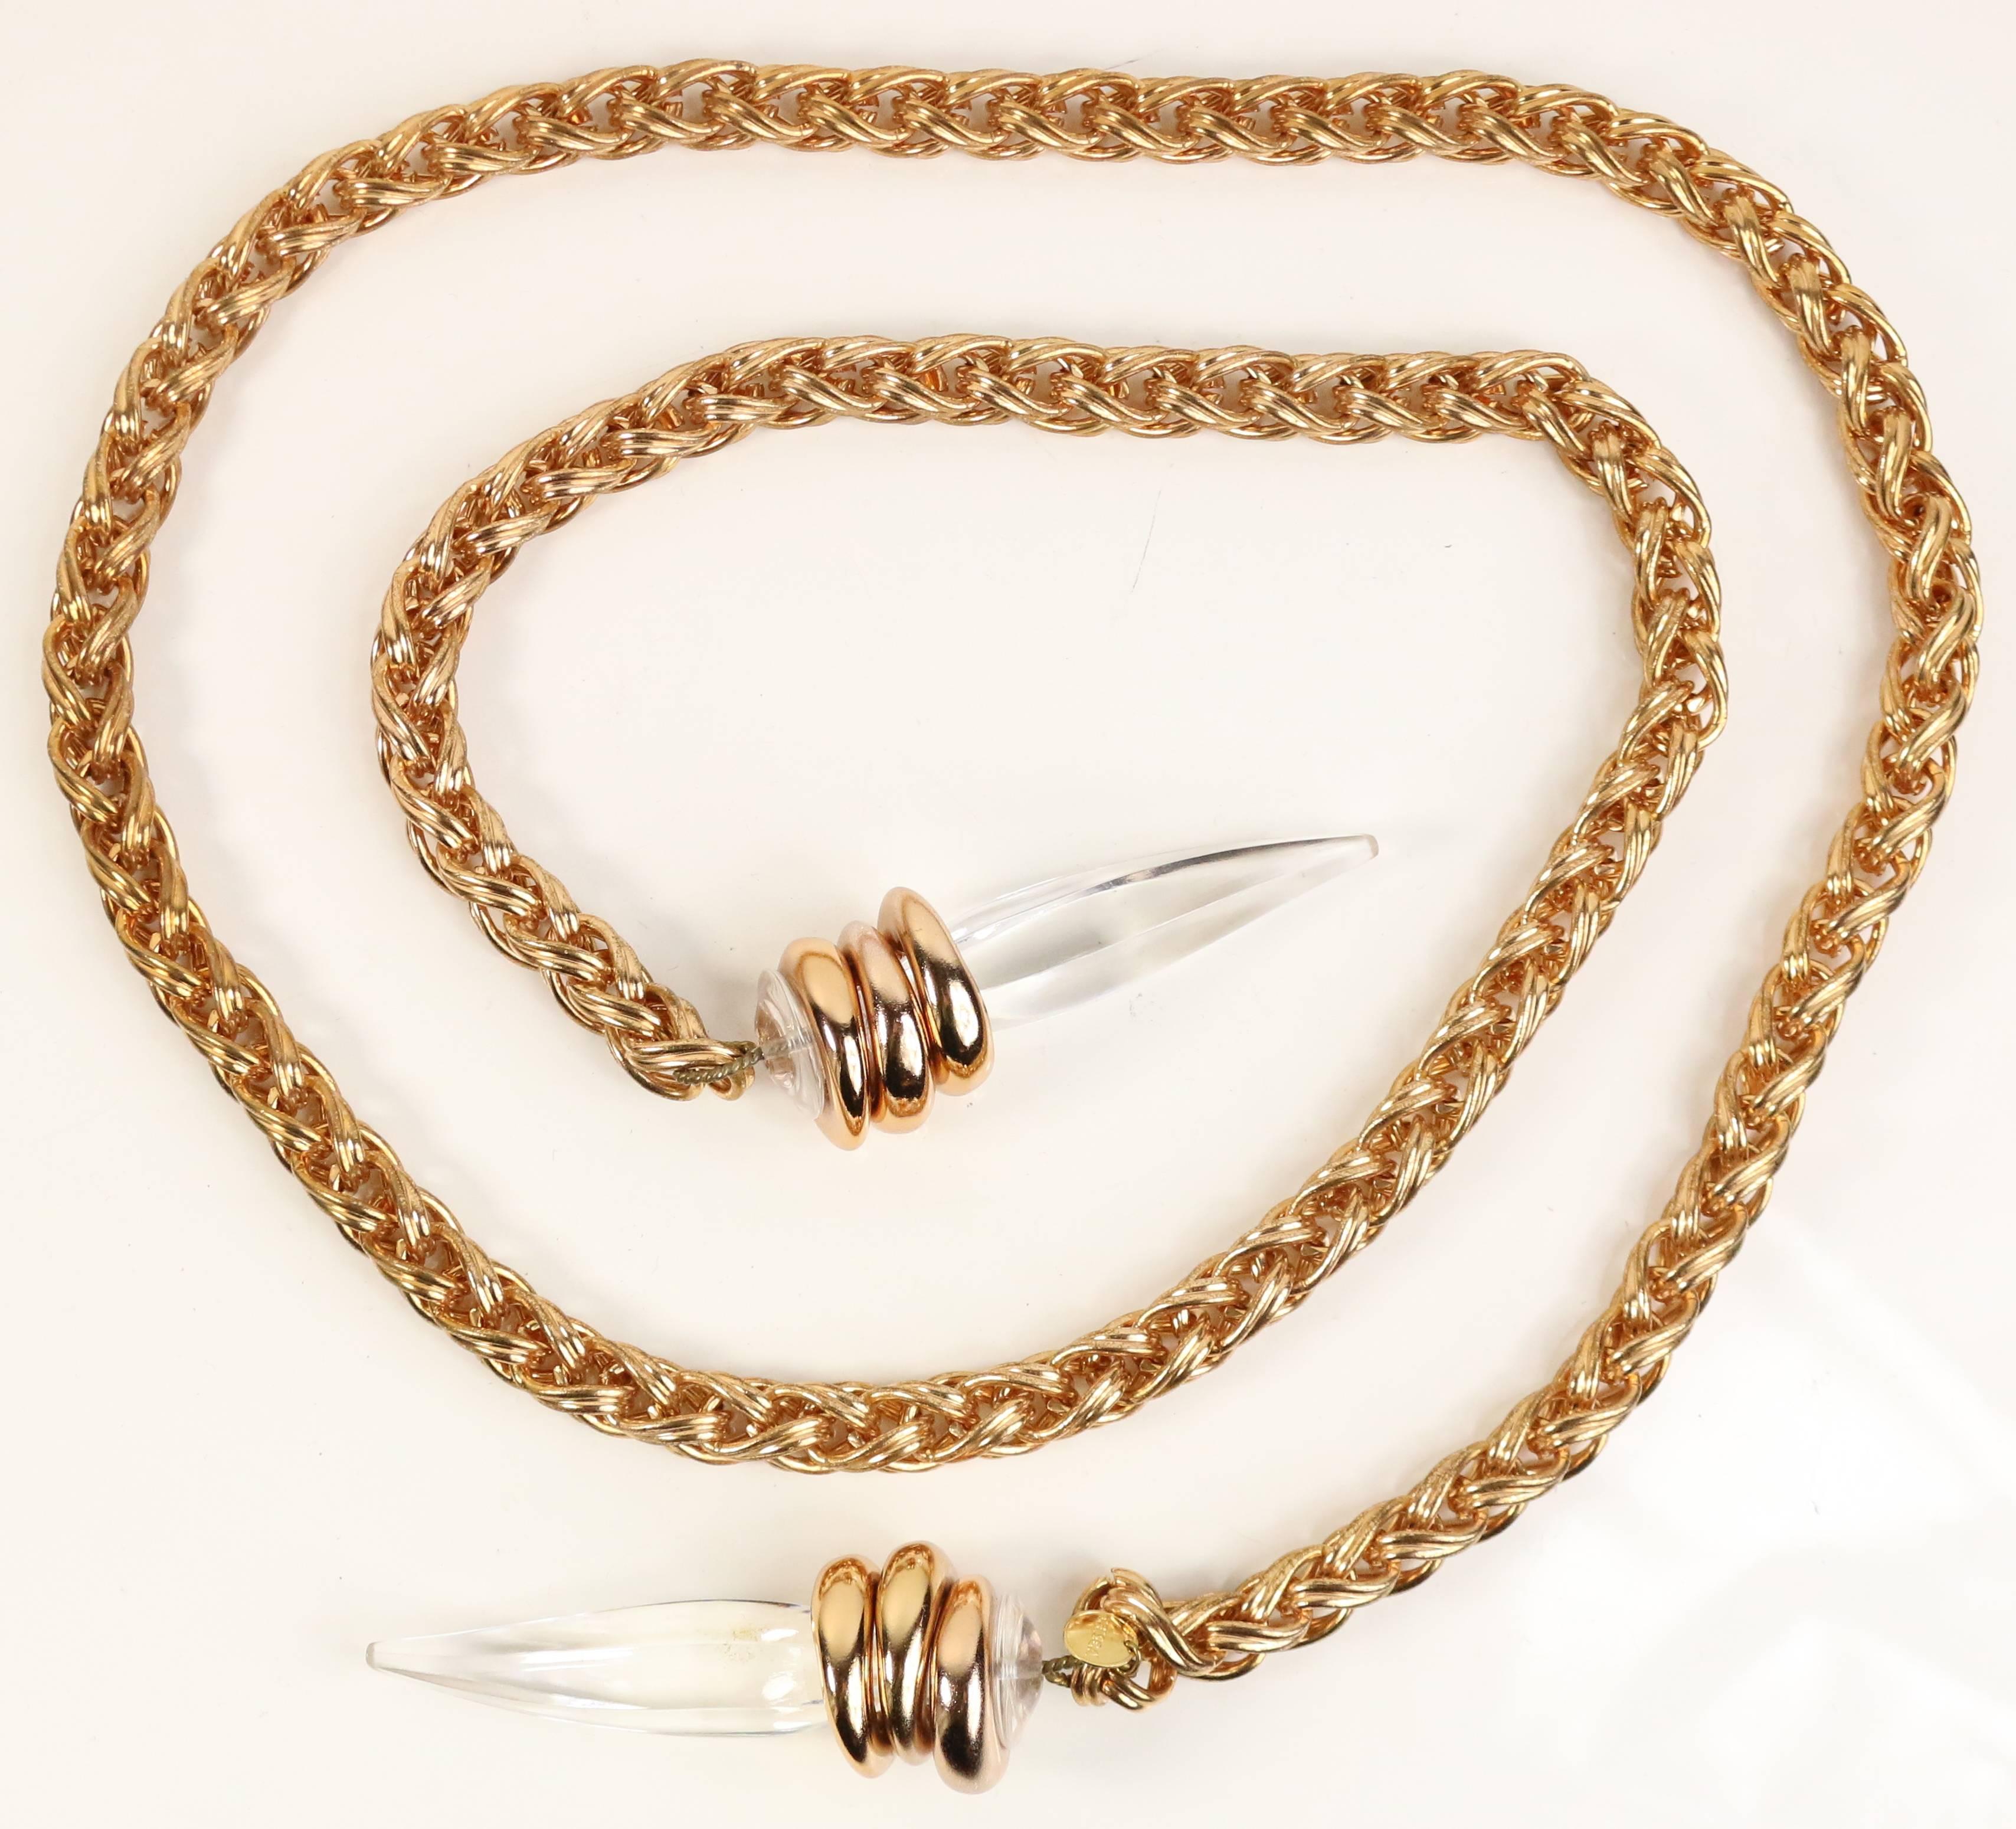 - Vintage 80s Crisco (brand launched by Escada) copper metal chain belt attached with two plastic 